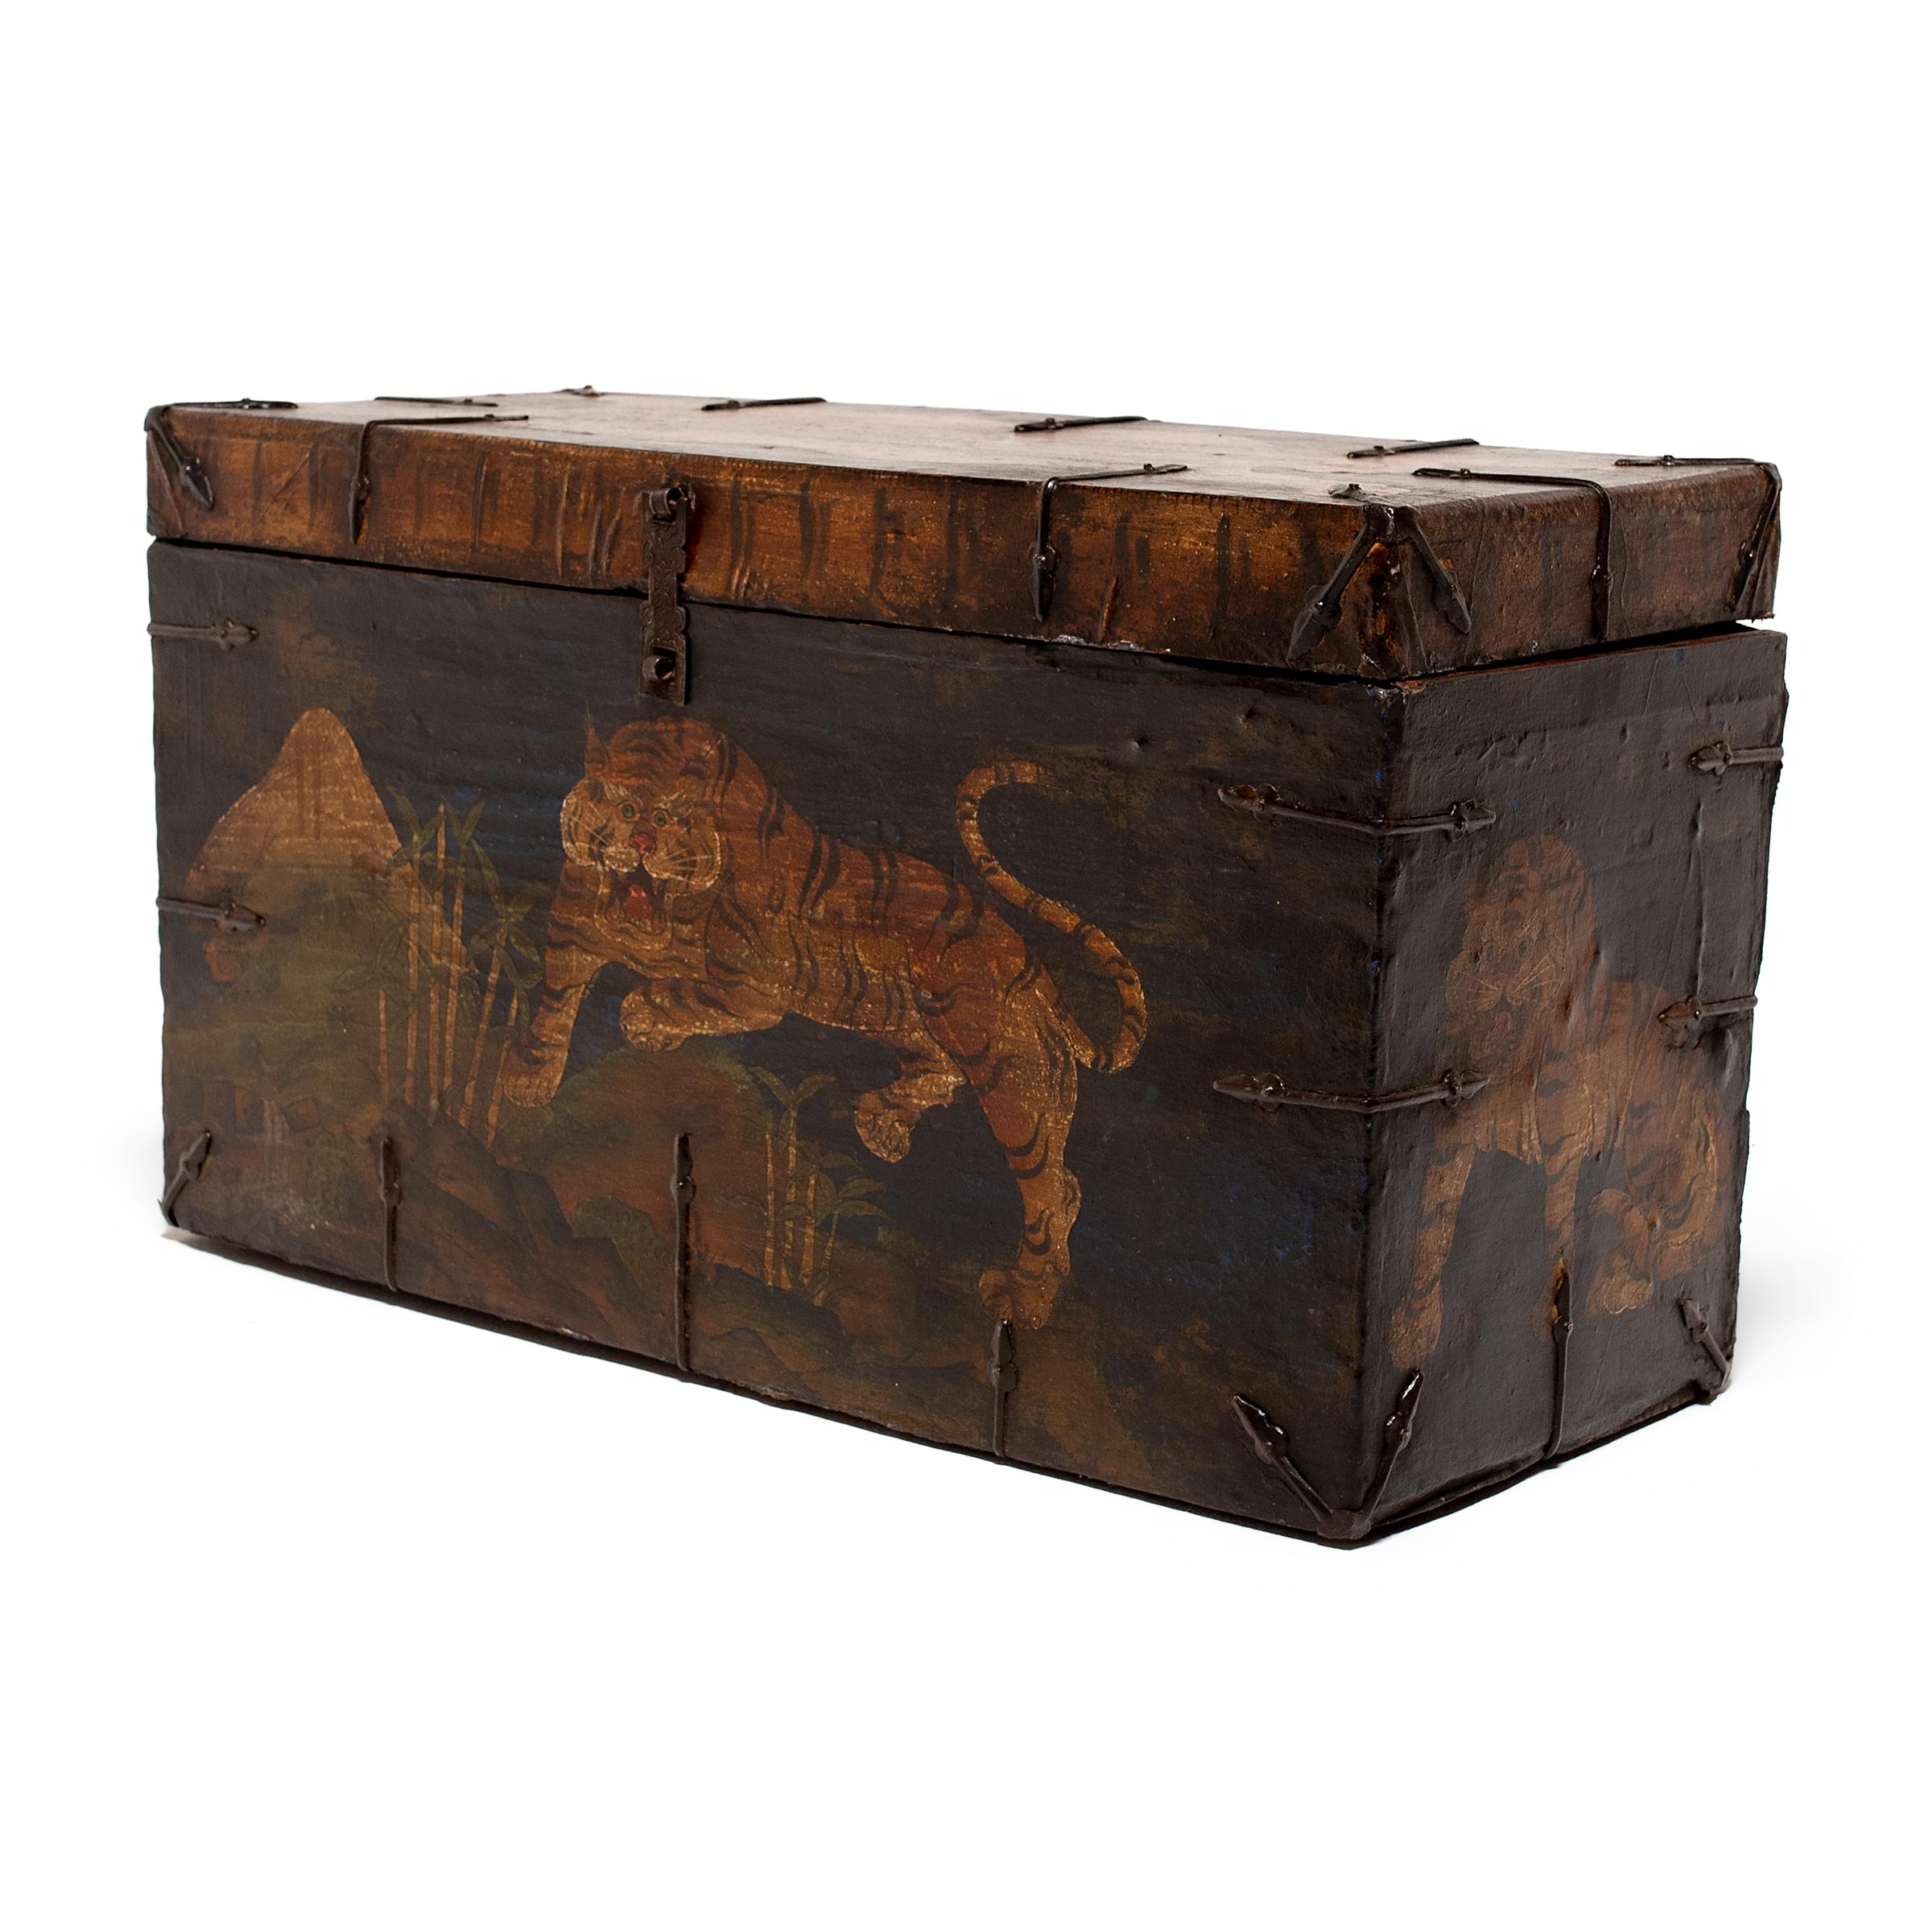 This Tibetan storage chest is richly finished with lacquered hide and iron hardware. The front is hand-painted with a fearsome tiger prowling a lush, mountainous landscape. Considered the king of all terrestrial creatures, the tiger is depicted